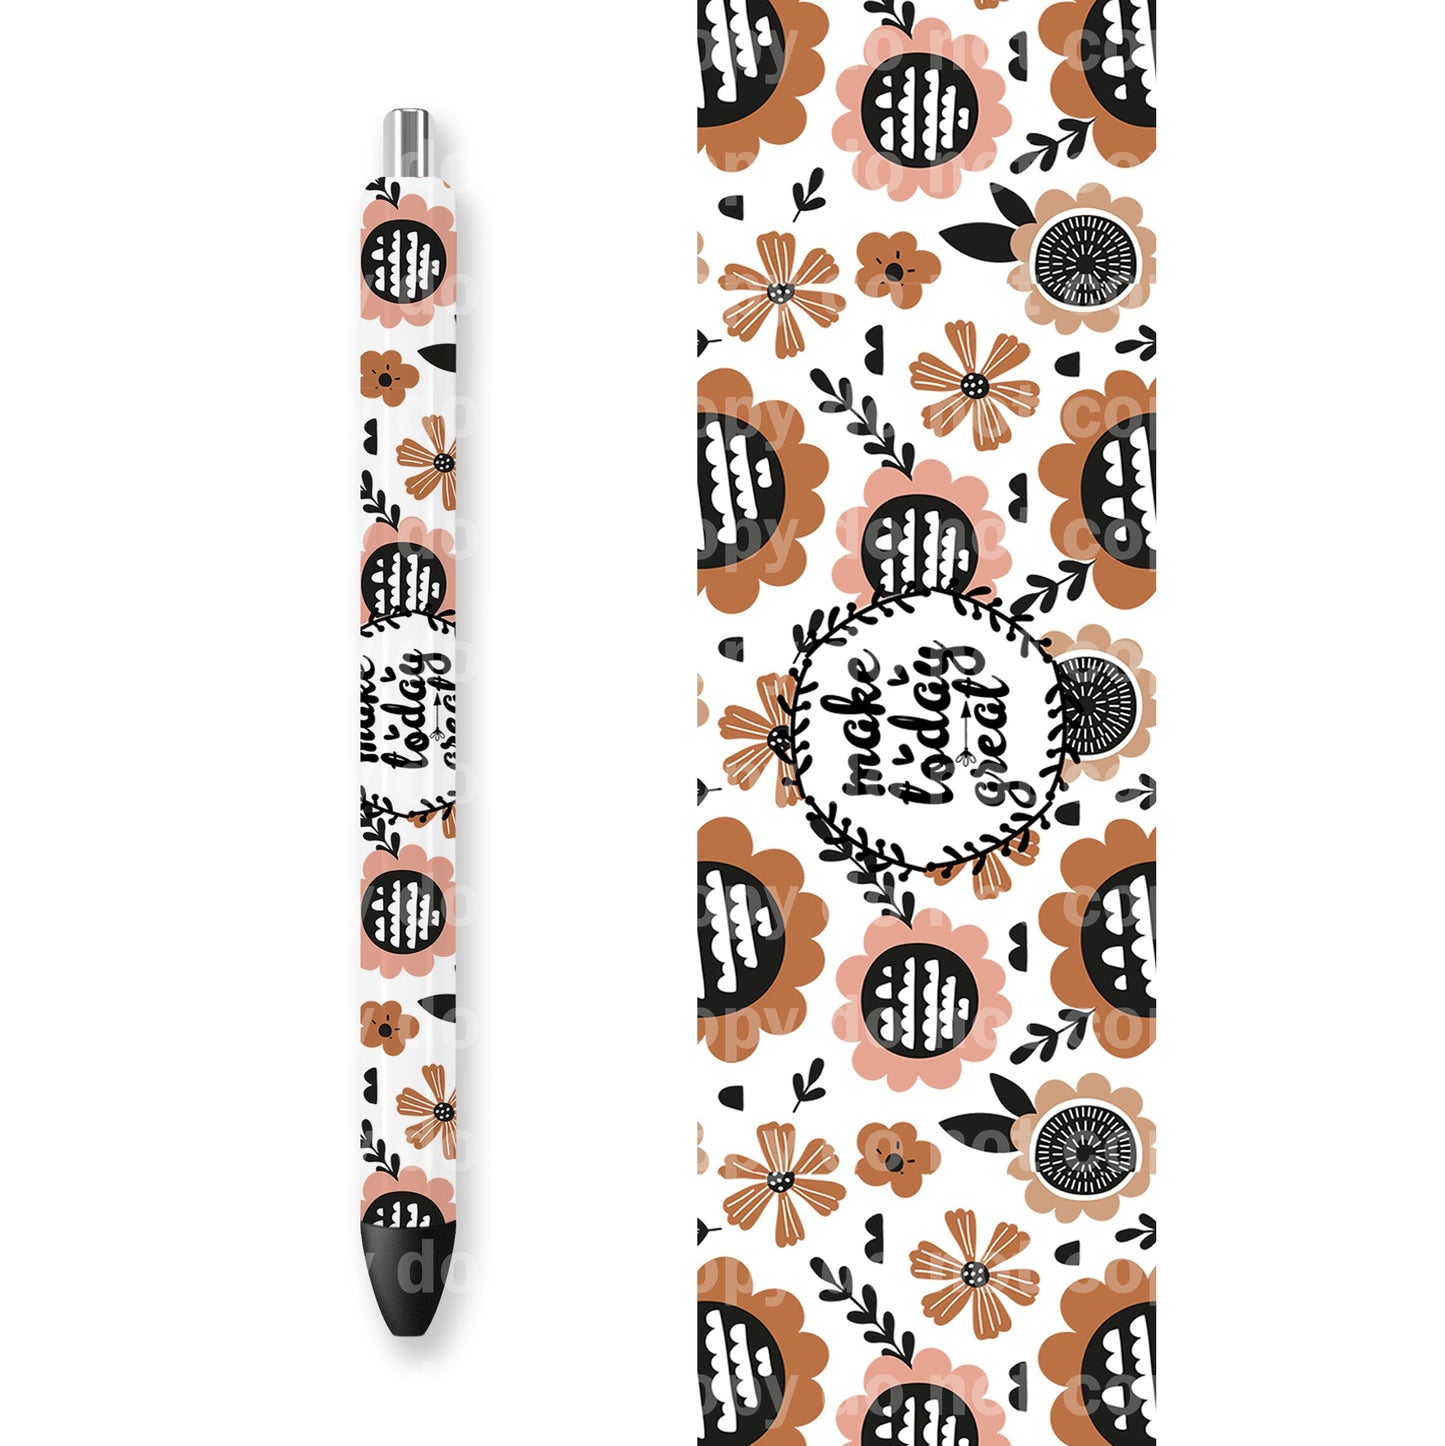 Make Today Great 16oz Cup Wrap and Pen Wrap